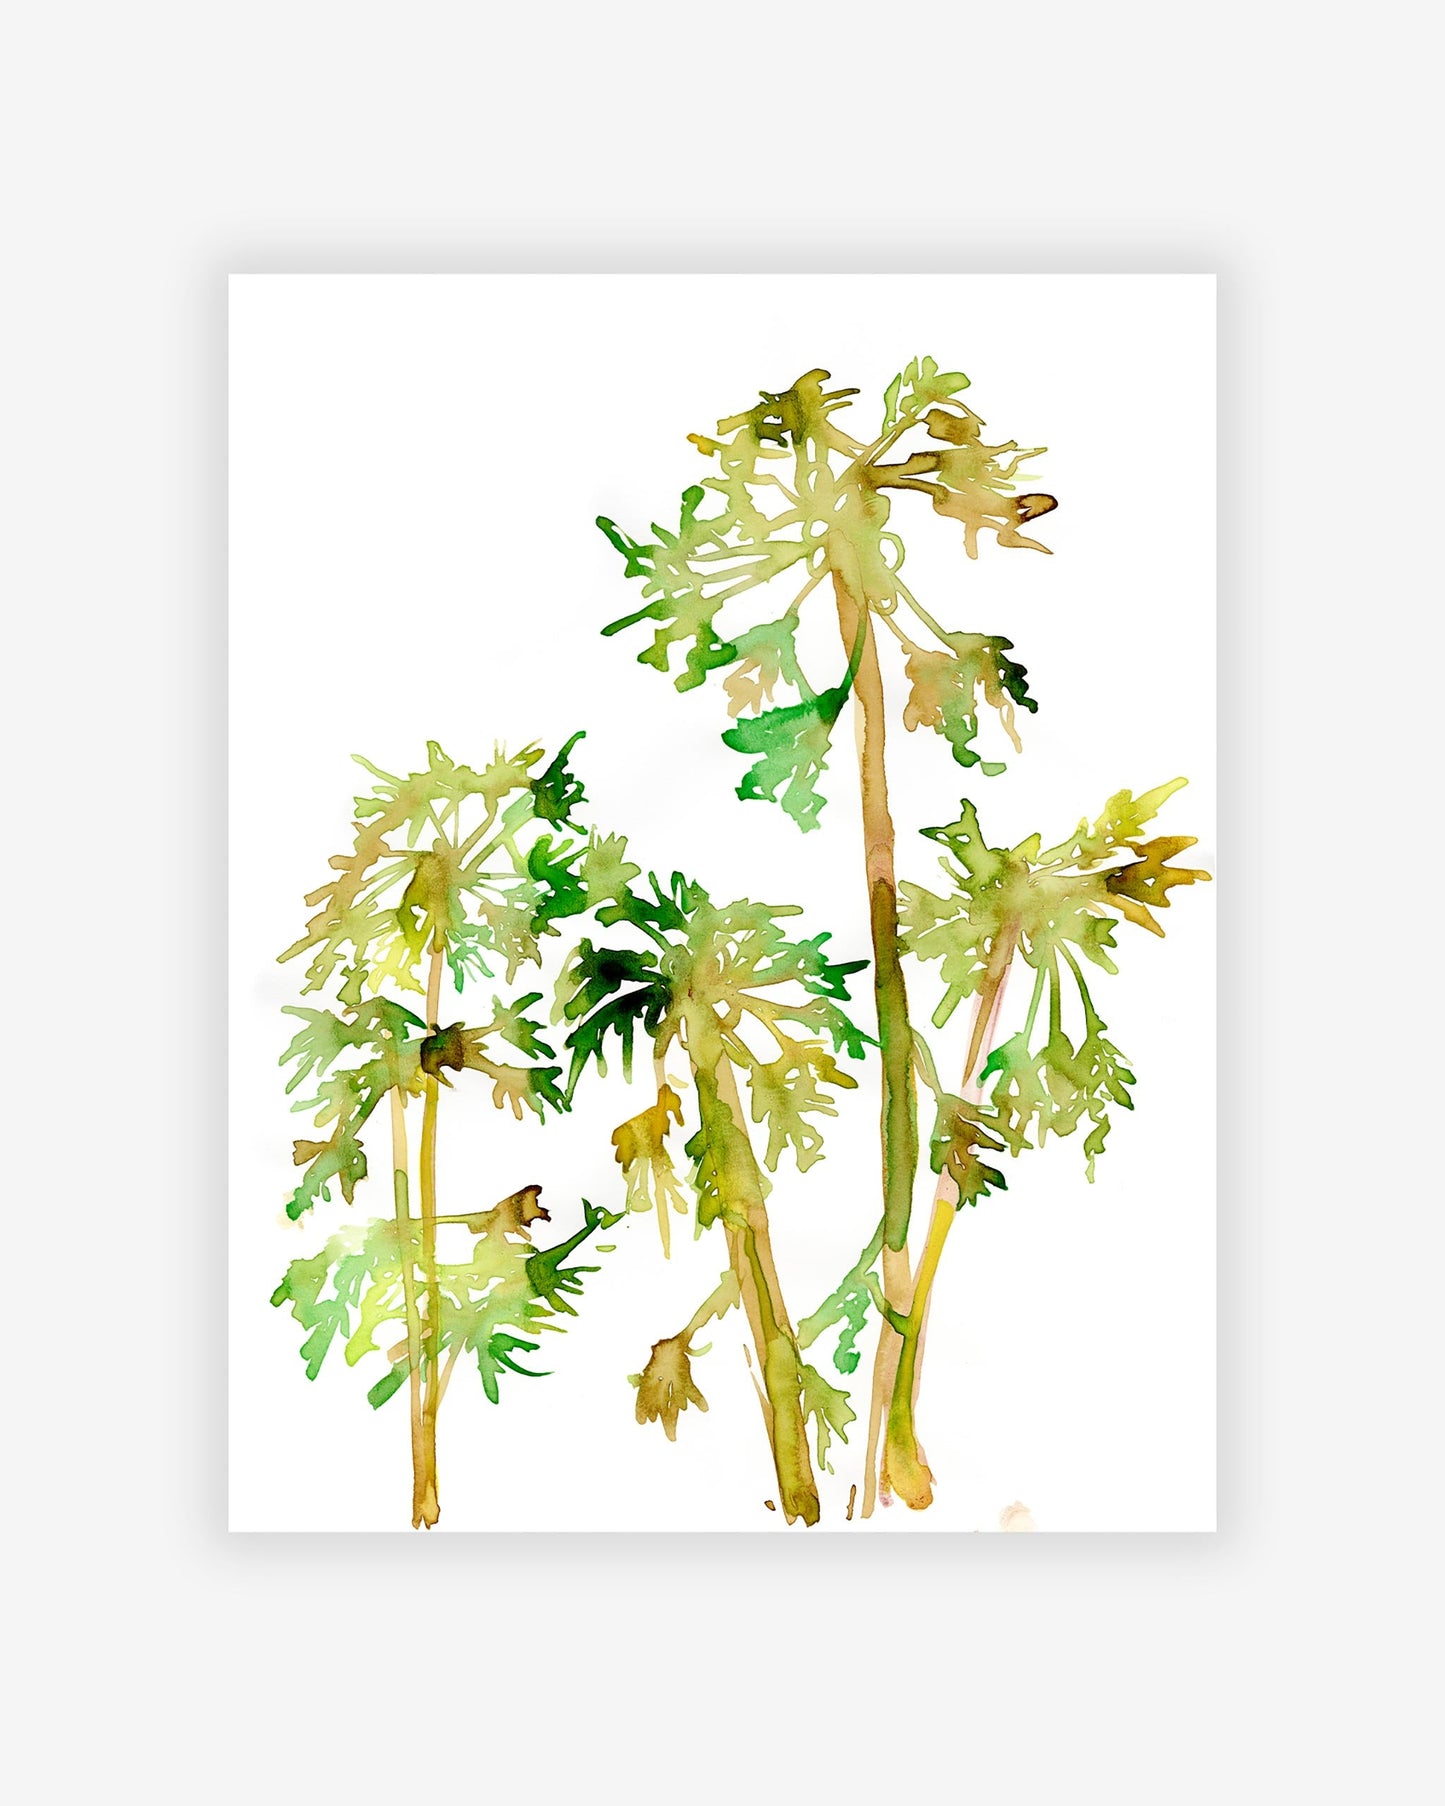 An Artist's Papaya Trees Print of palm trees on a white background